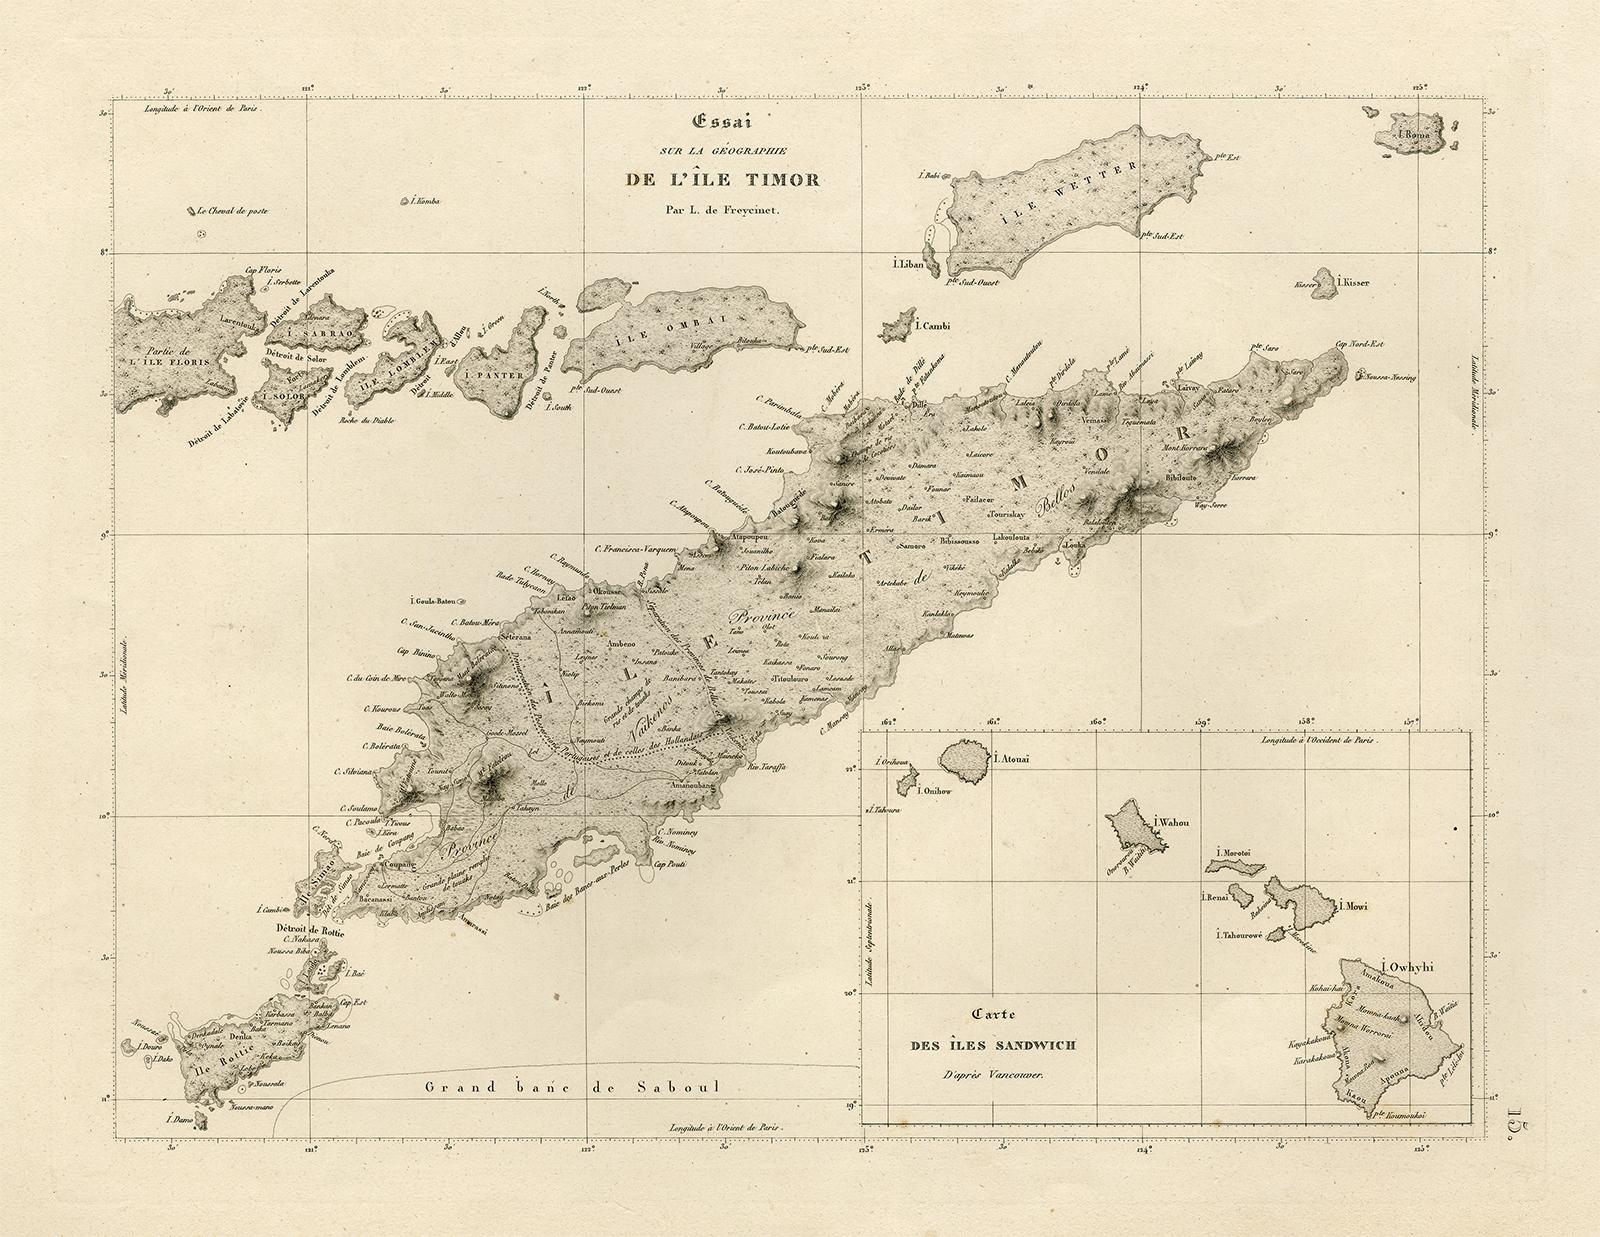 Antique map titled 'Essai sur la Geographie de l'Ile Timor.' 

A map showing Timor and the surrounding nearby islands (Floris, Sabrao, Solor, Lomblem, Panter, Ombai and Wetter. With an inset map of the Sandwich Islands (Hawaii). Source: 'Voyage